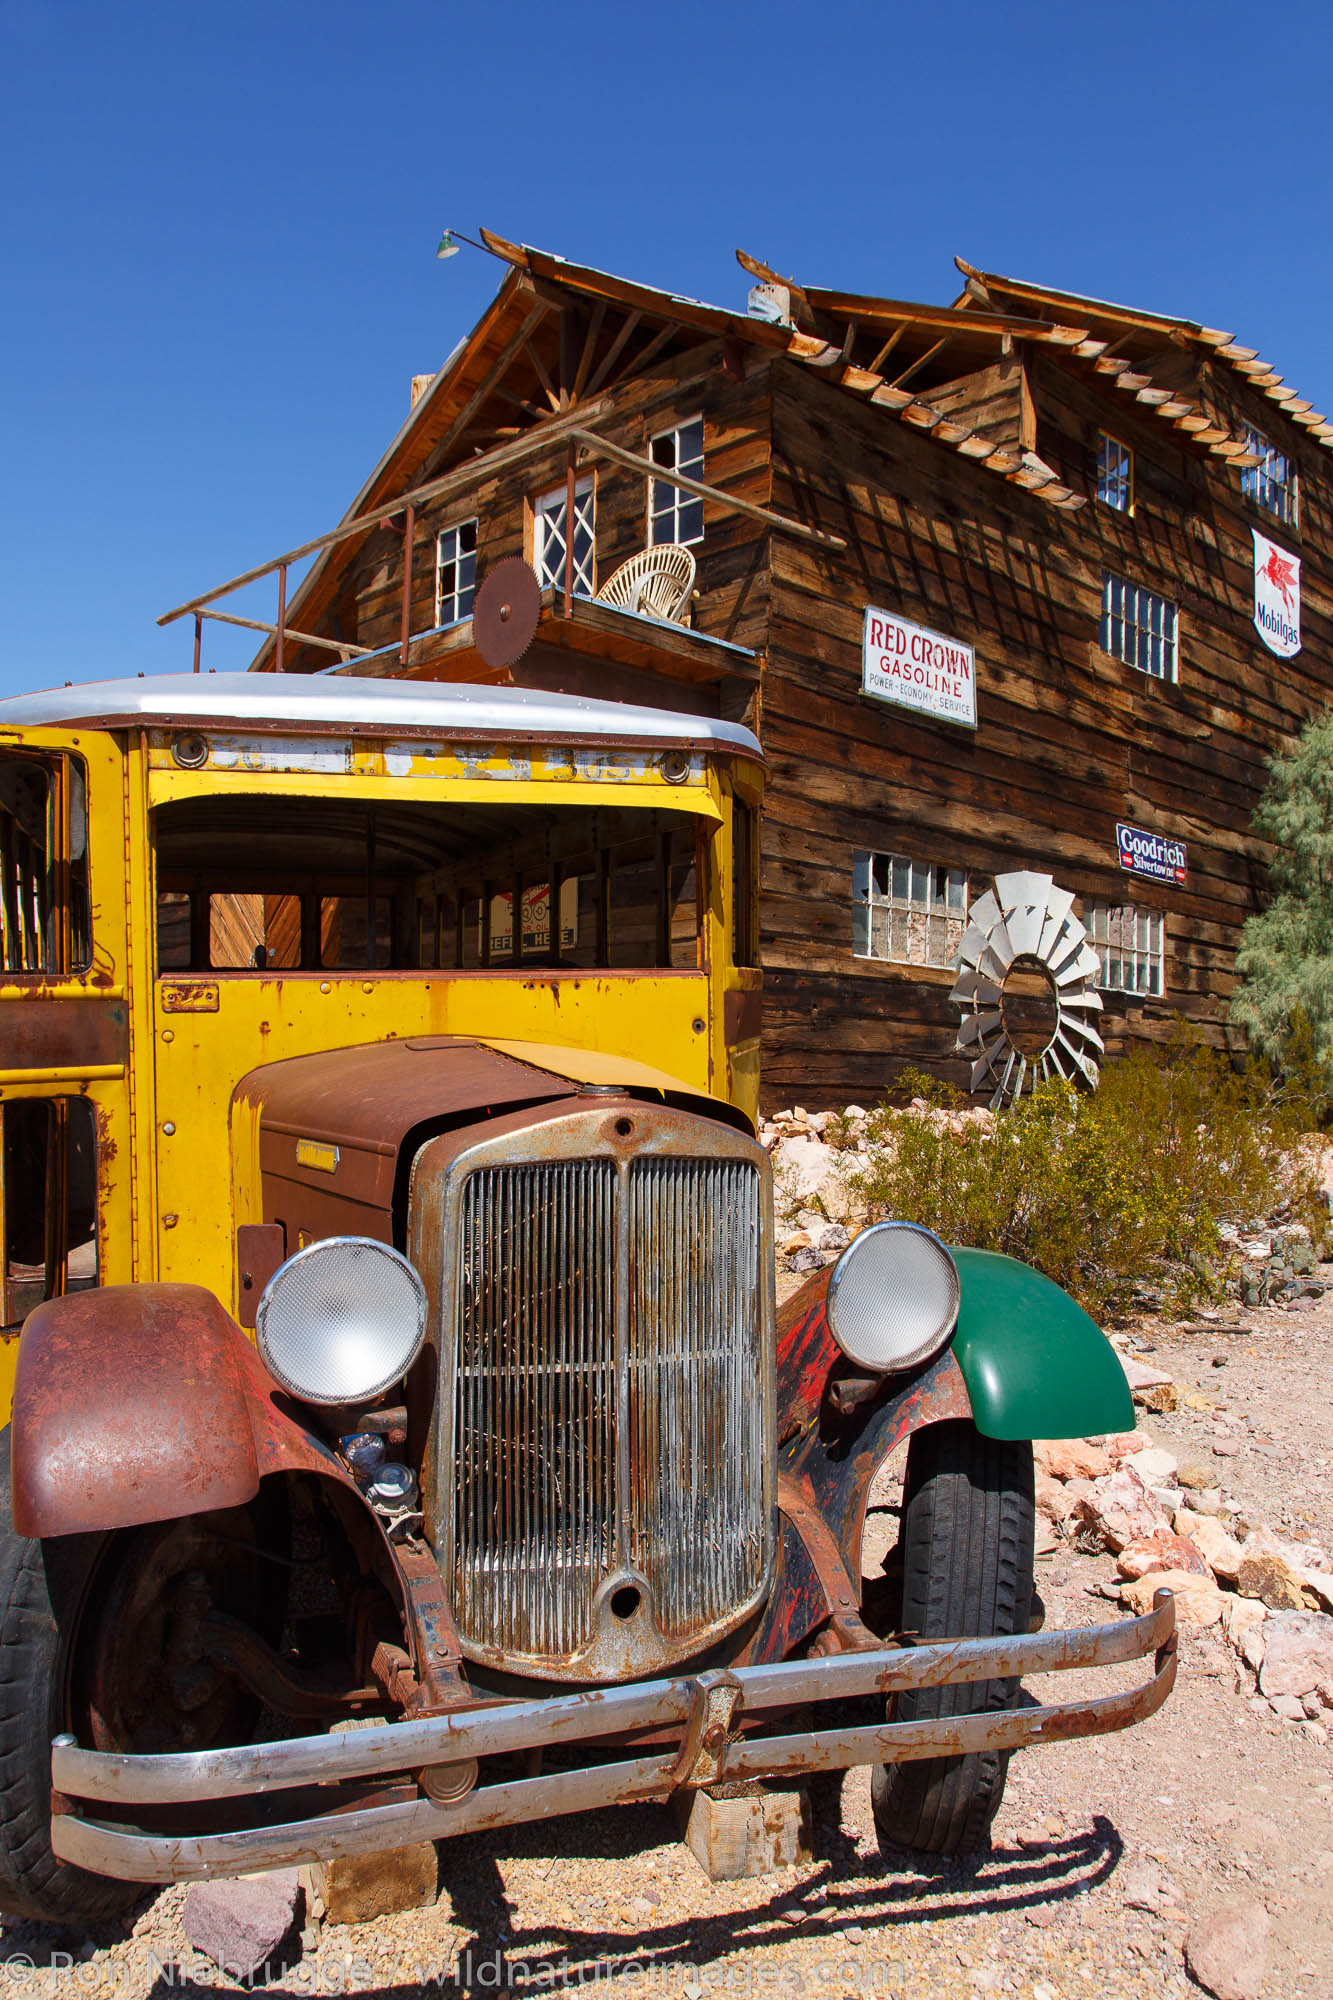 Techatticup ghost town and gold mine, Las Vegas, Nevada.